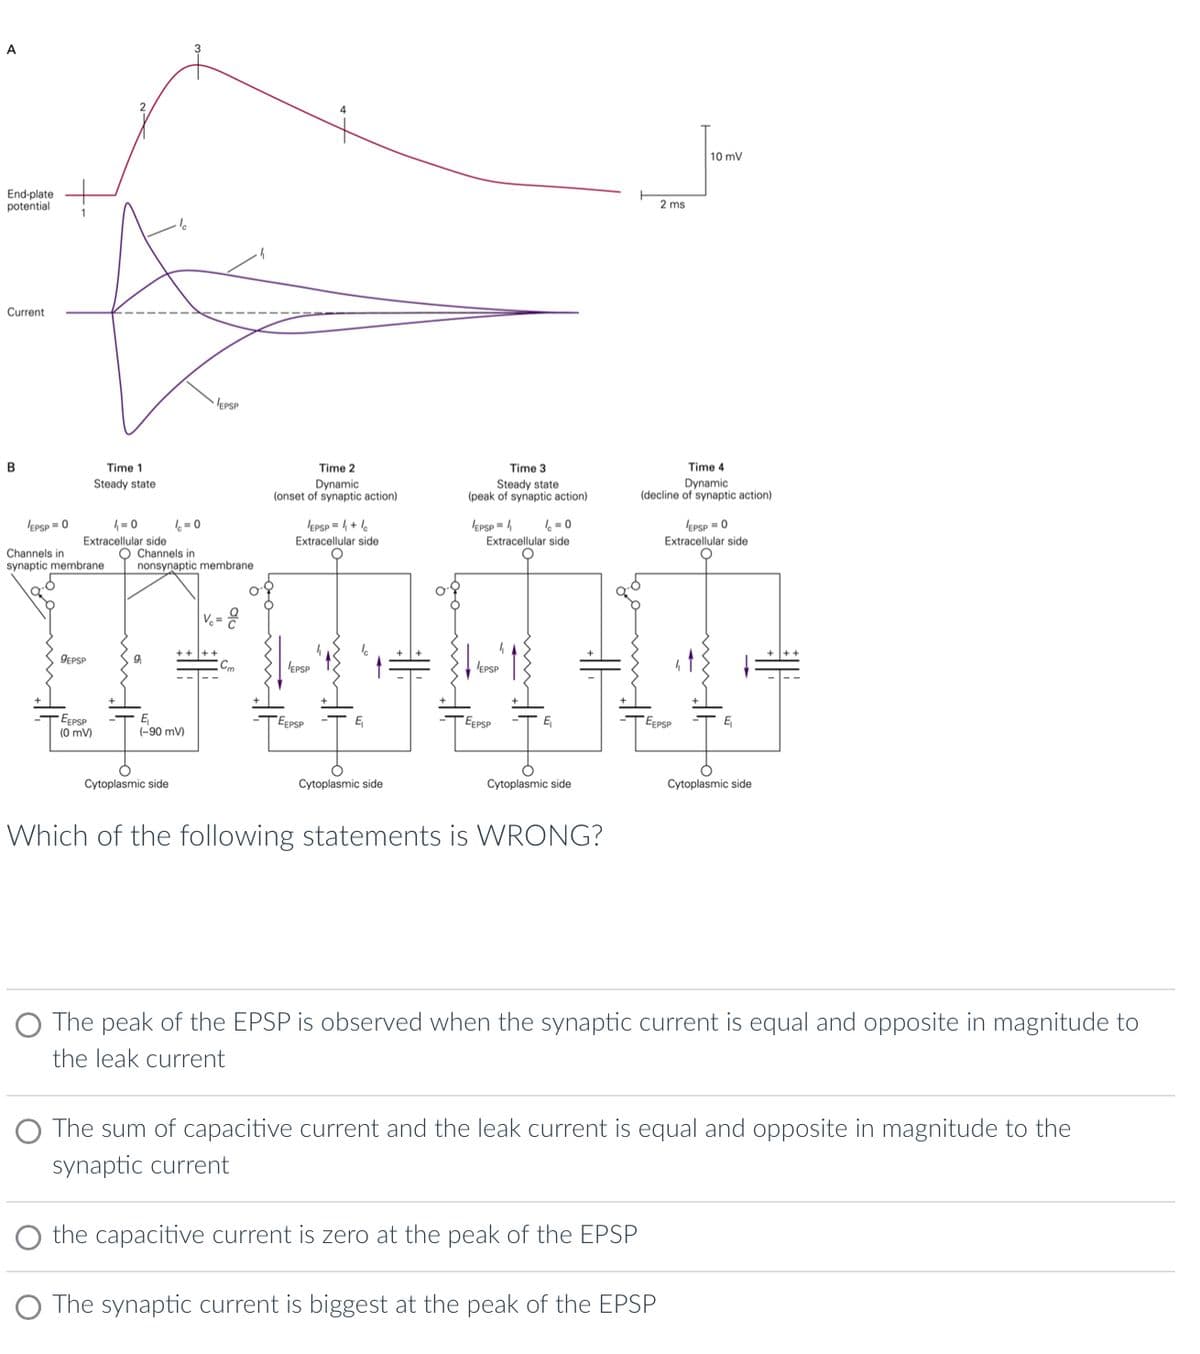 A
End-plate
potential
Current
B
EPSP = 0
Channels in
synaptic membrane
Time 1
Steady state
4=0
Extracellular side
GEPSP
EEPSP
(0 mV)
1=0
O Channels in
nonsynaptic membrane
E₁
(-90 mV)
EPSP
Cytoplasmic side
Cm
Time 2
Dynamic
(onset of synaptic action)
EPSP = ₁ + 1
Extracellular side
EPSP
EEPSP
E
Cytoplasmic side
Time 3
Steady state
(peak of synaptic action)
EPSP =
1=0
Extracellular side
EPSP
EEPSP
E₁
Cytoplasmic side
Which of the following statements is WRONG?
2 ms
the capacitive current is zero at the peak of the EPSP
Time 4
Dynamic
(decline of synaptic action)
10 mV
EEPSP
EPSP = 0
Extracellular side
The synaptic current is biggest at the peak of the EPSP
E
O The peak of the EPSP is observed when the synaptic current is equal and opposite in magnitude to
the leak current
Cytoplasmic side
The sum of capacitive current and the leak current is equal and opposite in magnitude to the
synaptic current